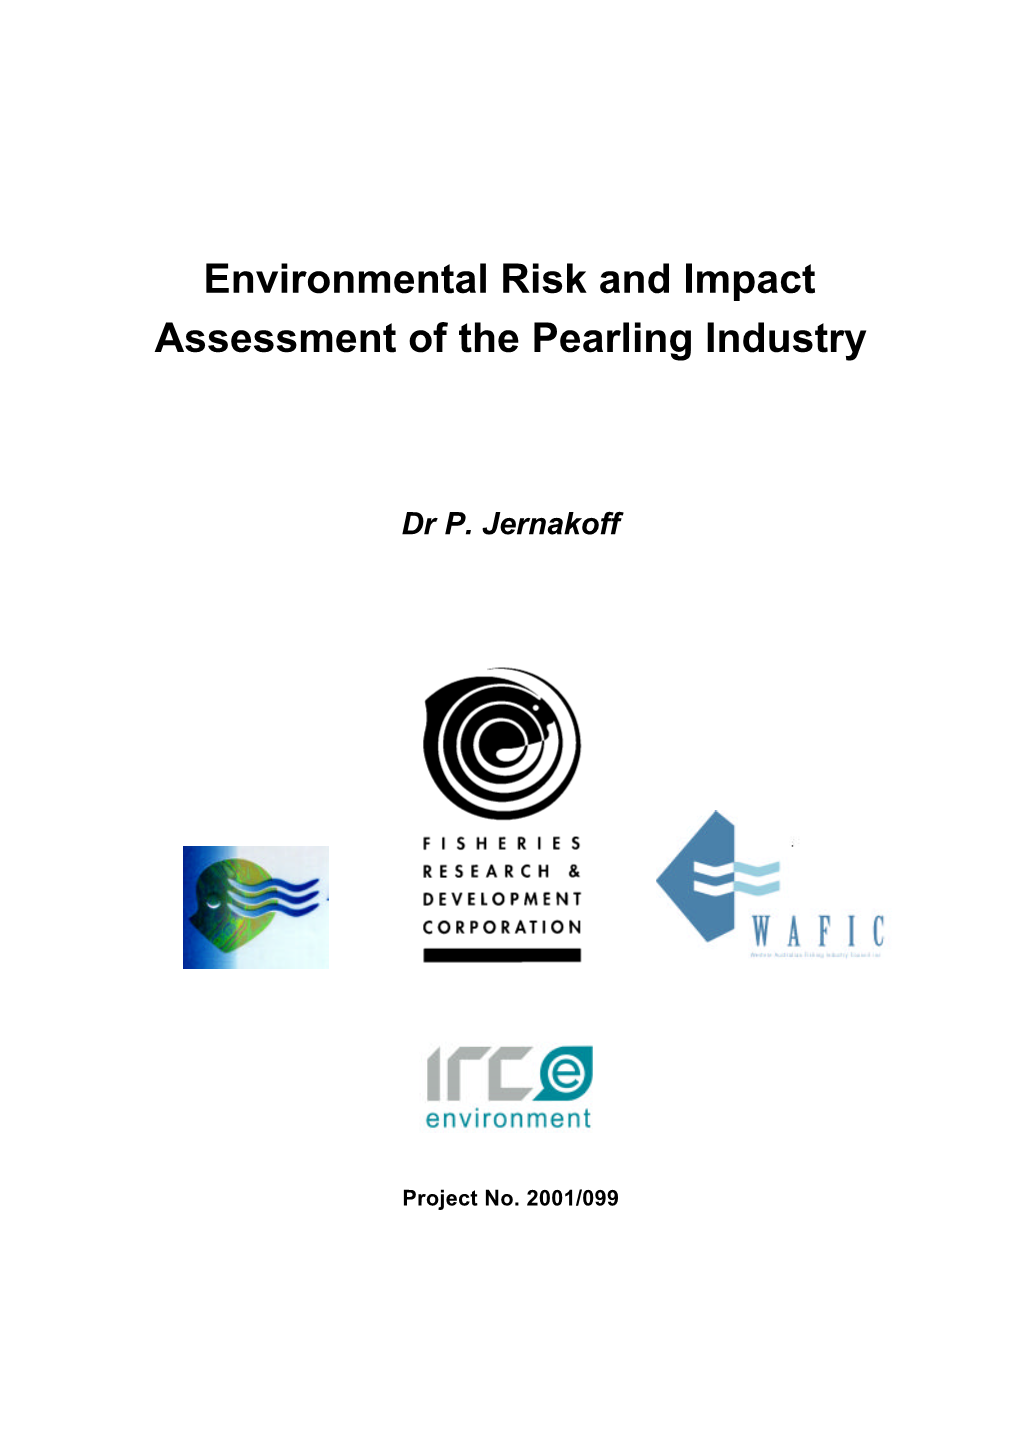 Environmental Risk and Impact Assessment of the Pearling Industry